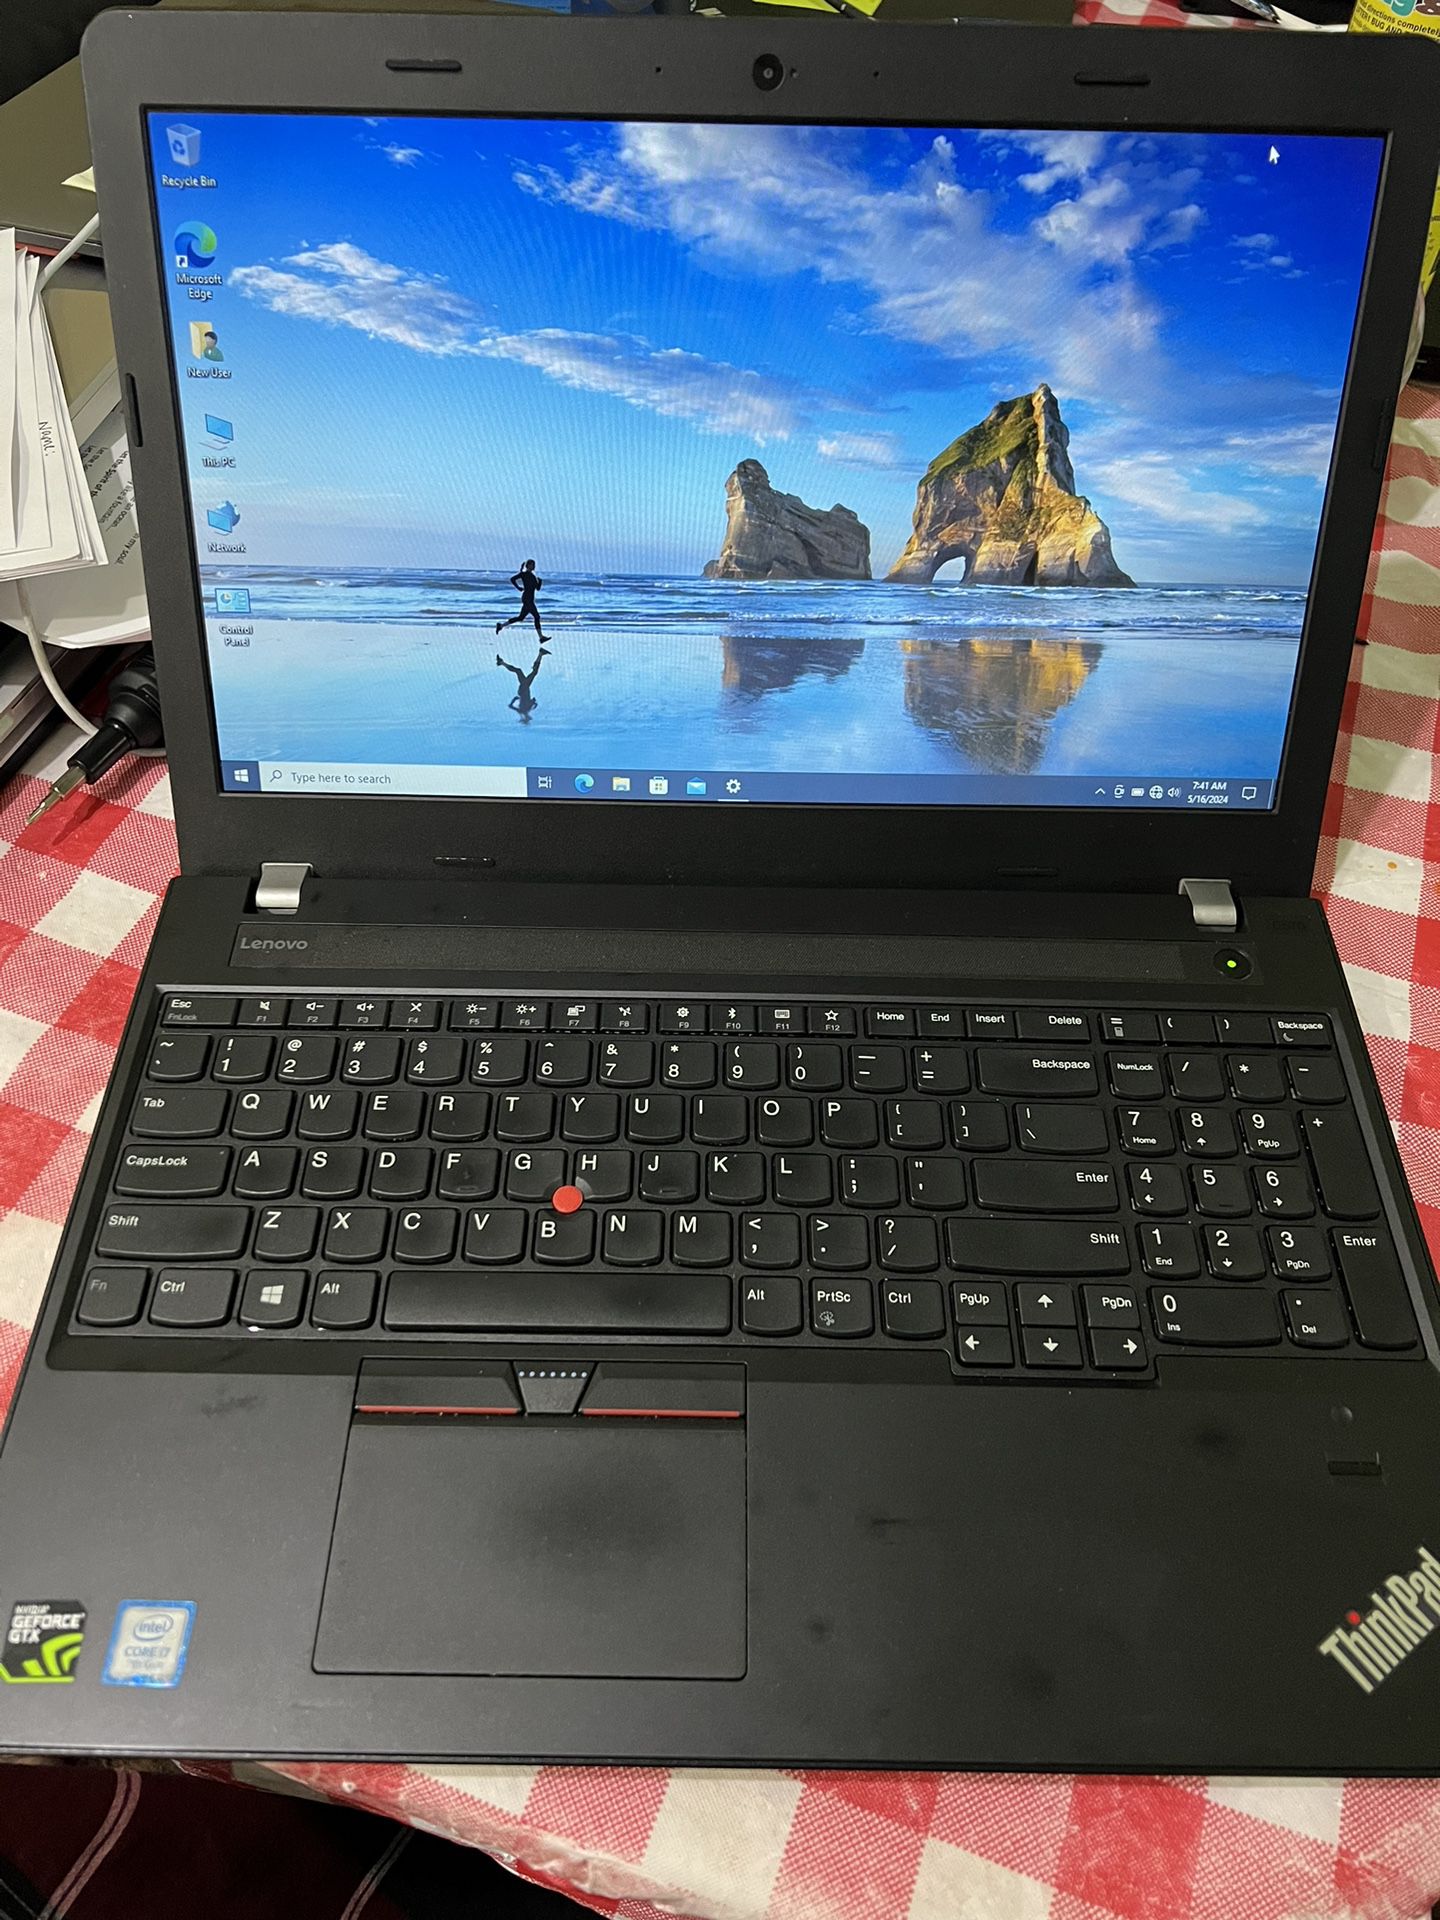 Lenovo Thinkpad E570 Intel Core i7 7th Gen @2.90Ghz 16gb Ram 256gb SSD Nvidia GTX 950M 2gb Graphics , Windows 10 Charger. Best for Graphics design and